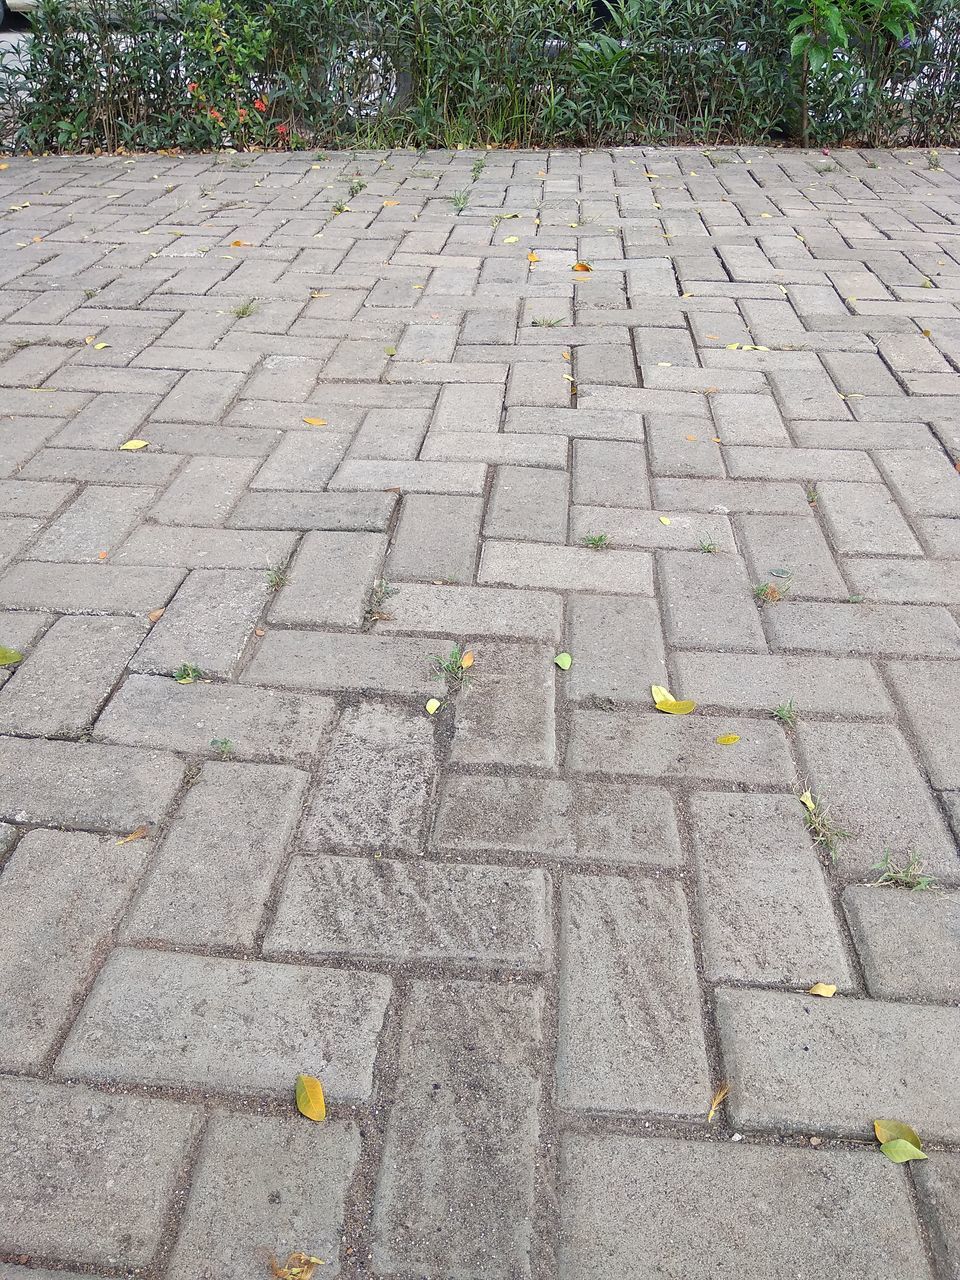 sidewalk, footpath, road surface, walkway, cobblestone, driveway, paving stone, day, asphalt, stone, no people, street, high angle view, plant, outdoor structure, flooring, the way forward, outdoors, city, lane, pattern, floor, public space, nature, roof, flagstone, road, transportation, lawn, sign